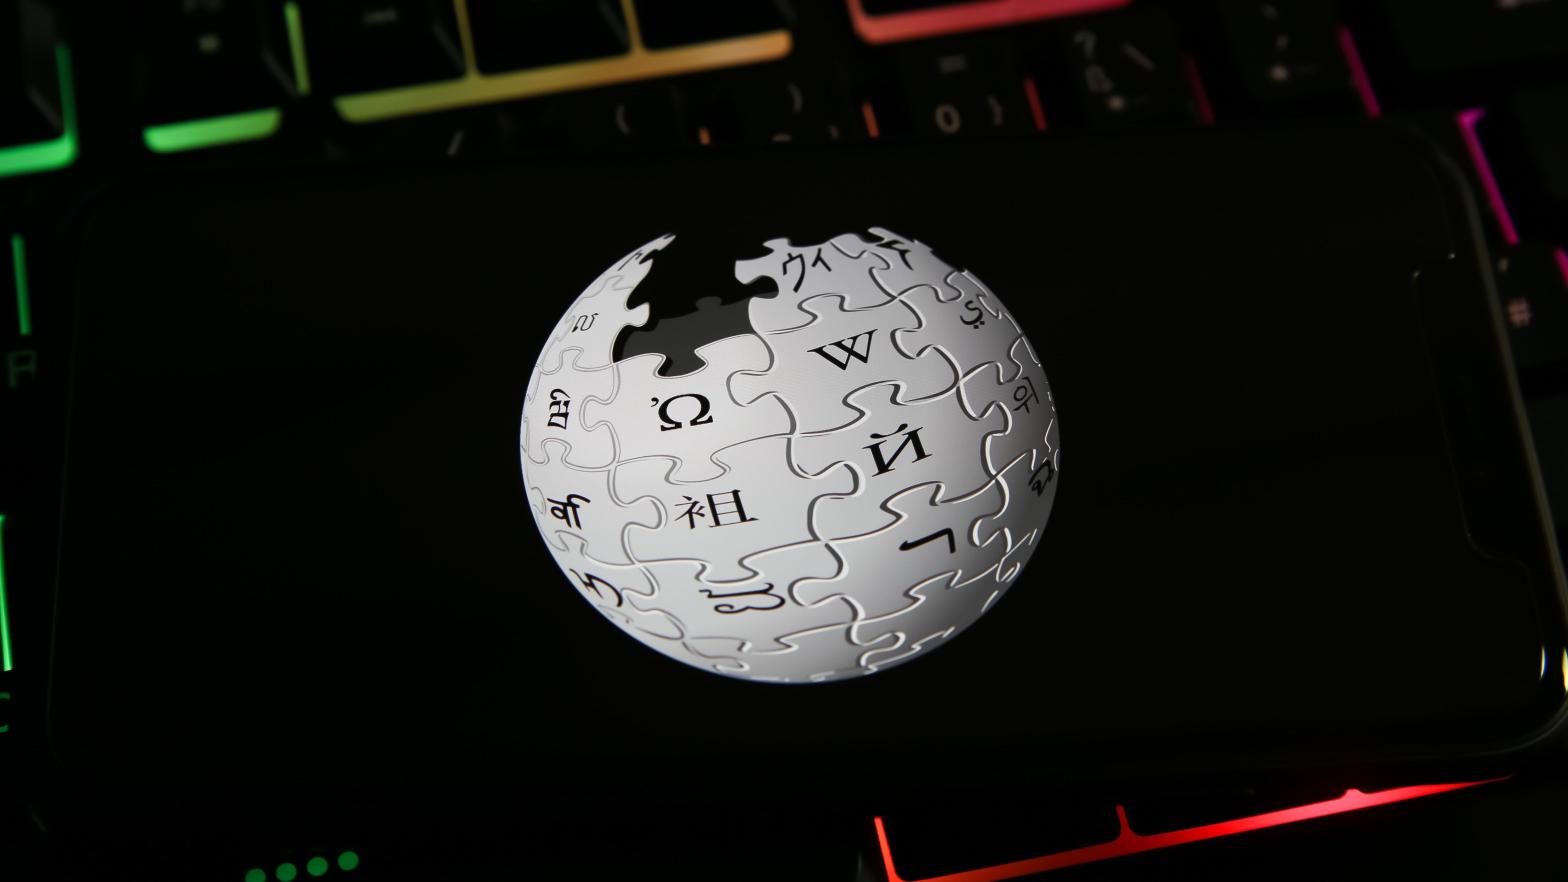 Wikipedia has enjoyed the protections of Section 230 for over 22 years, but an upcoming Supreme Court decision could cause major issues with its community-run volunteer administrators. (Photo: Ralf Liebhold, Shutterstock)